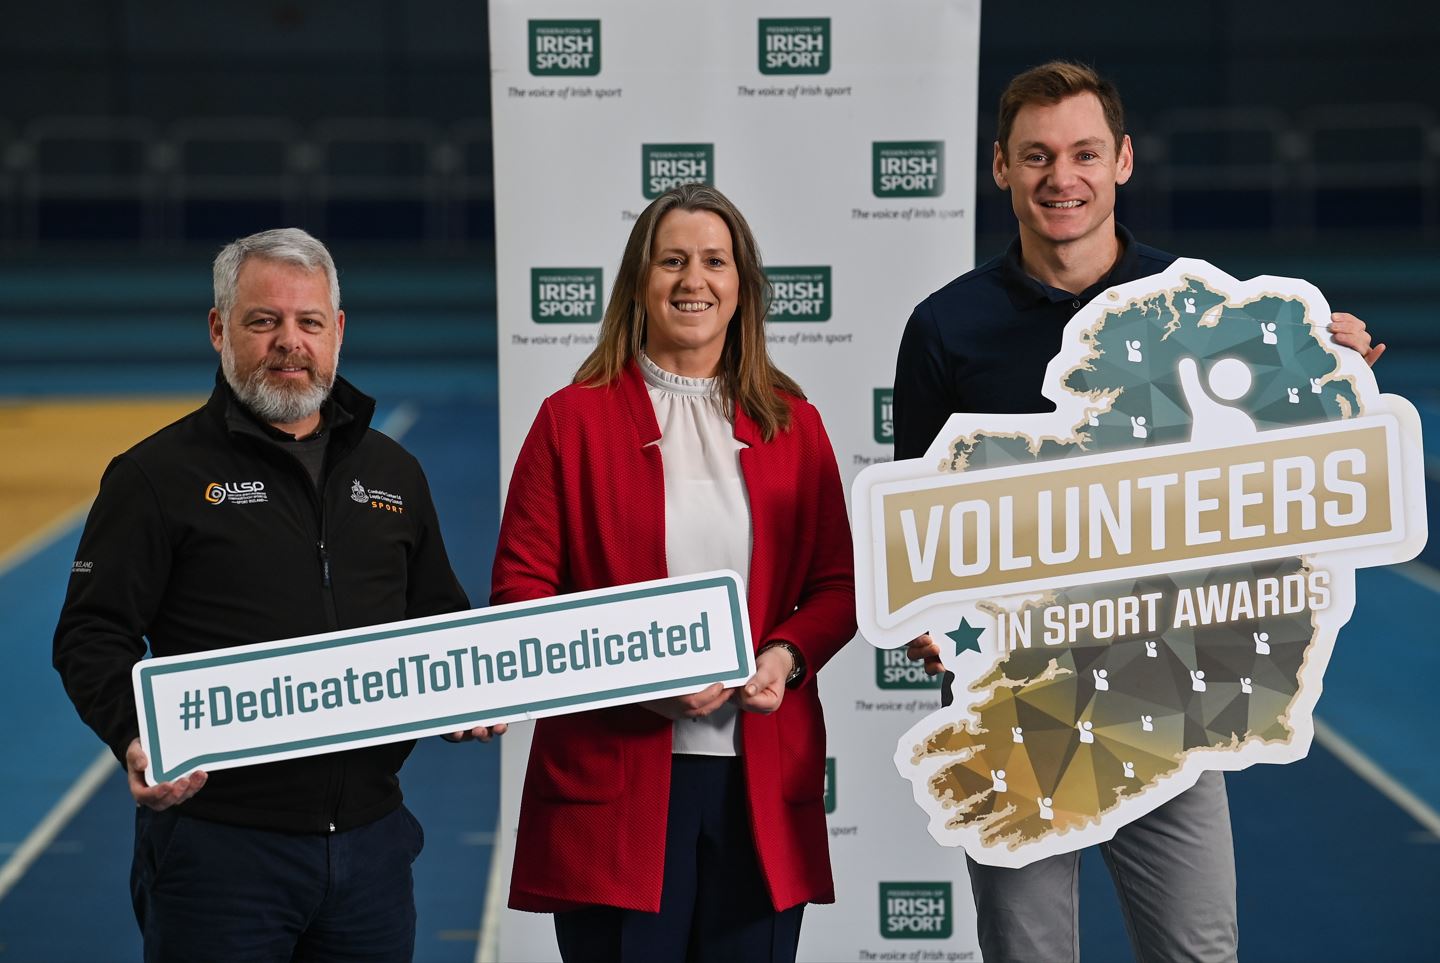 Federation of Irish Sport Launches the National 2023 Volunteers in Sport Awards, Celebrating Unsung Heroes